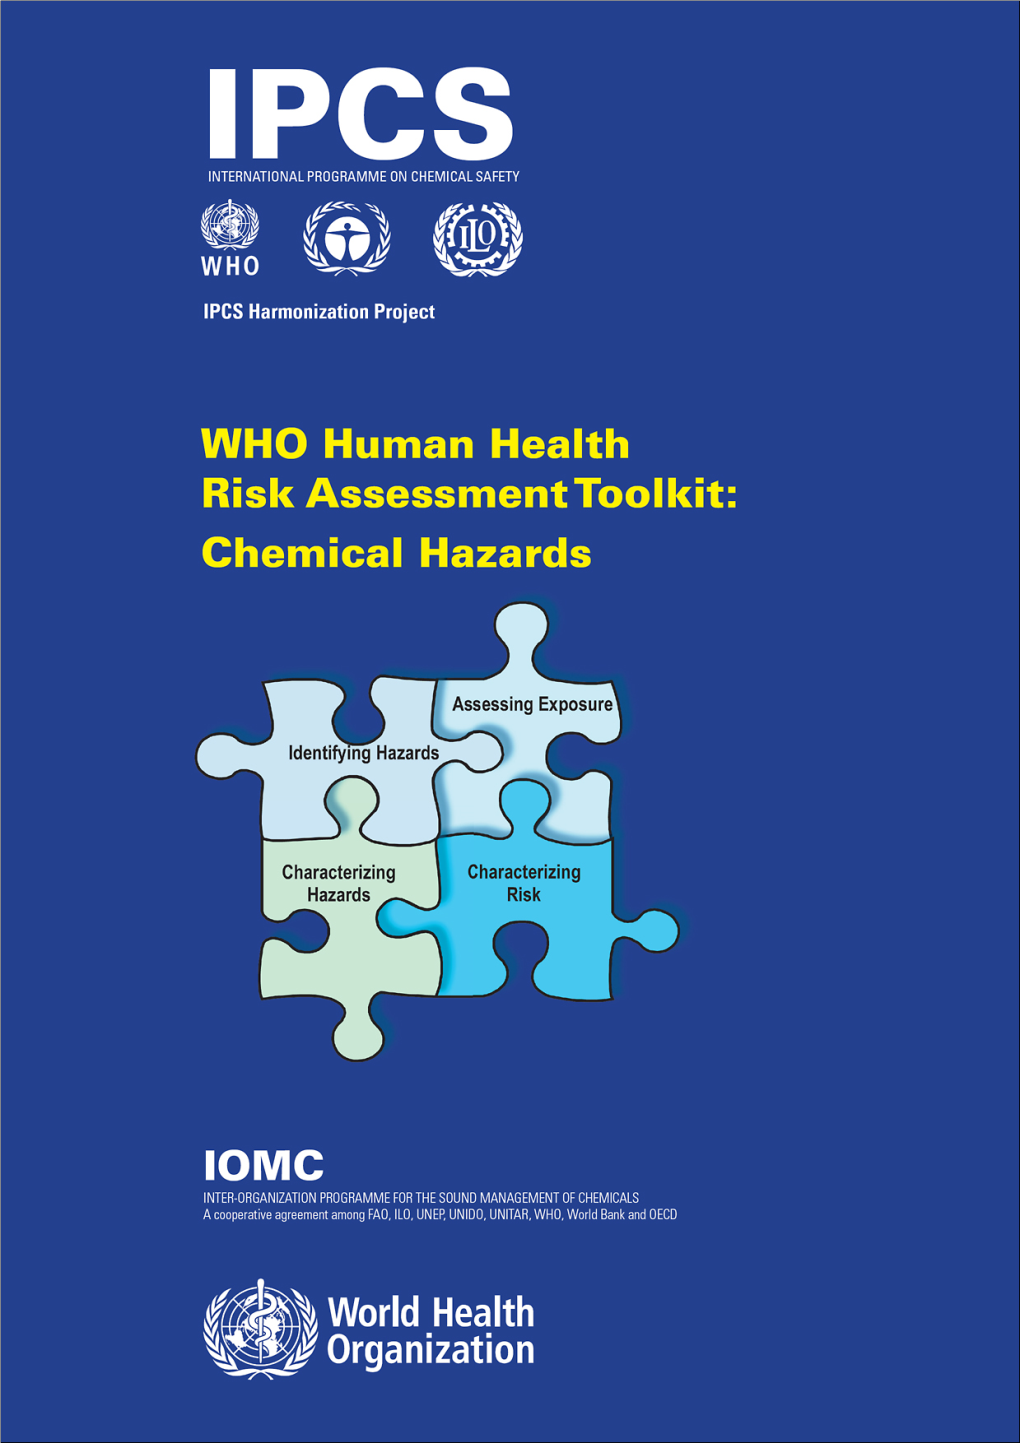 Who Human Health Risk Assessment Toolkit: Chemical Hazards